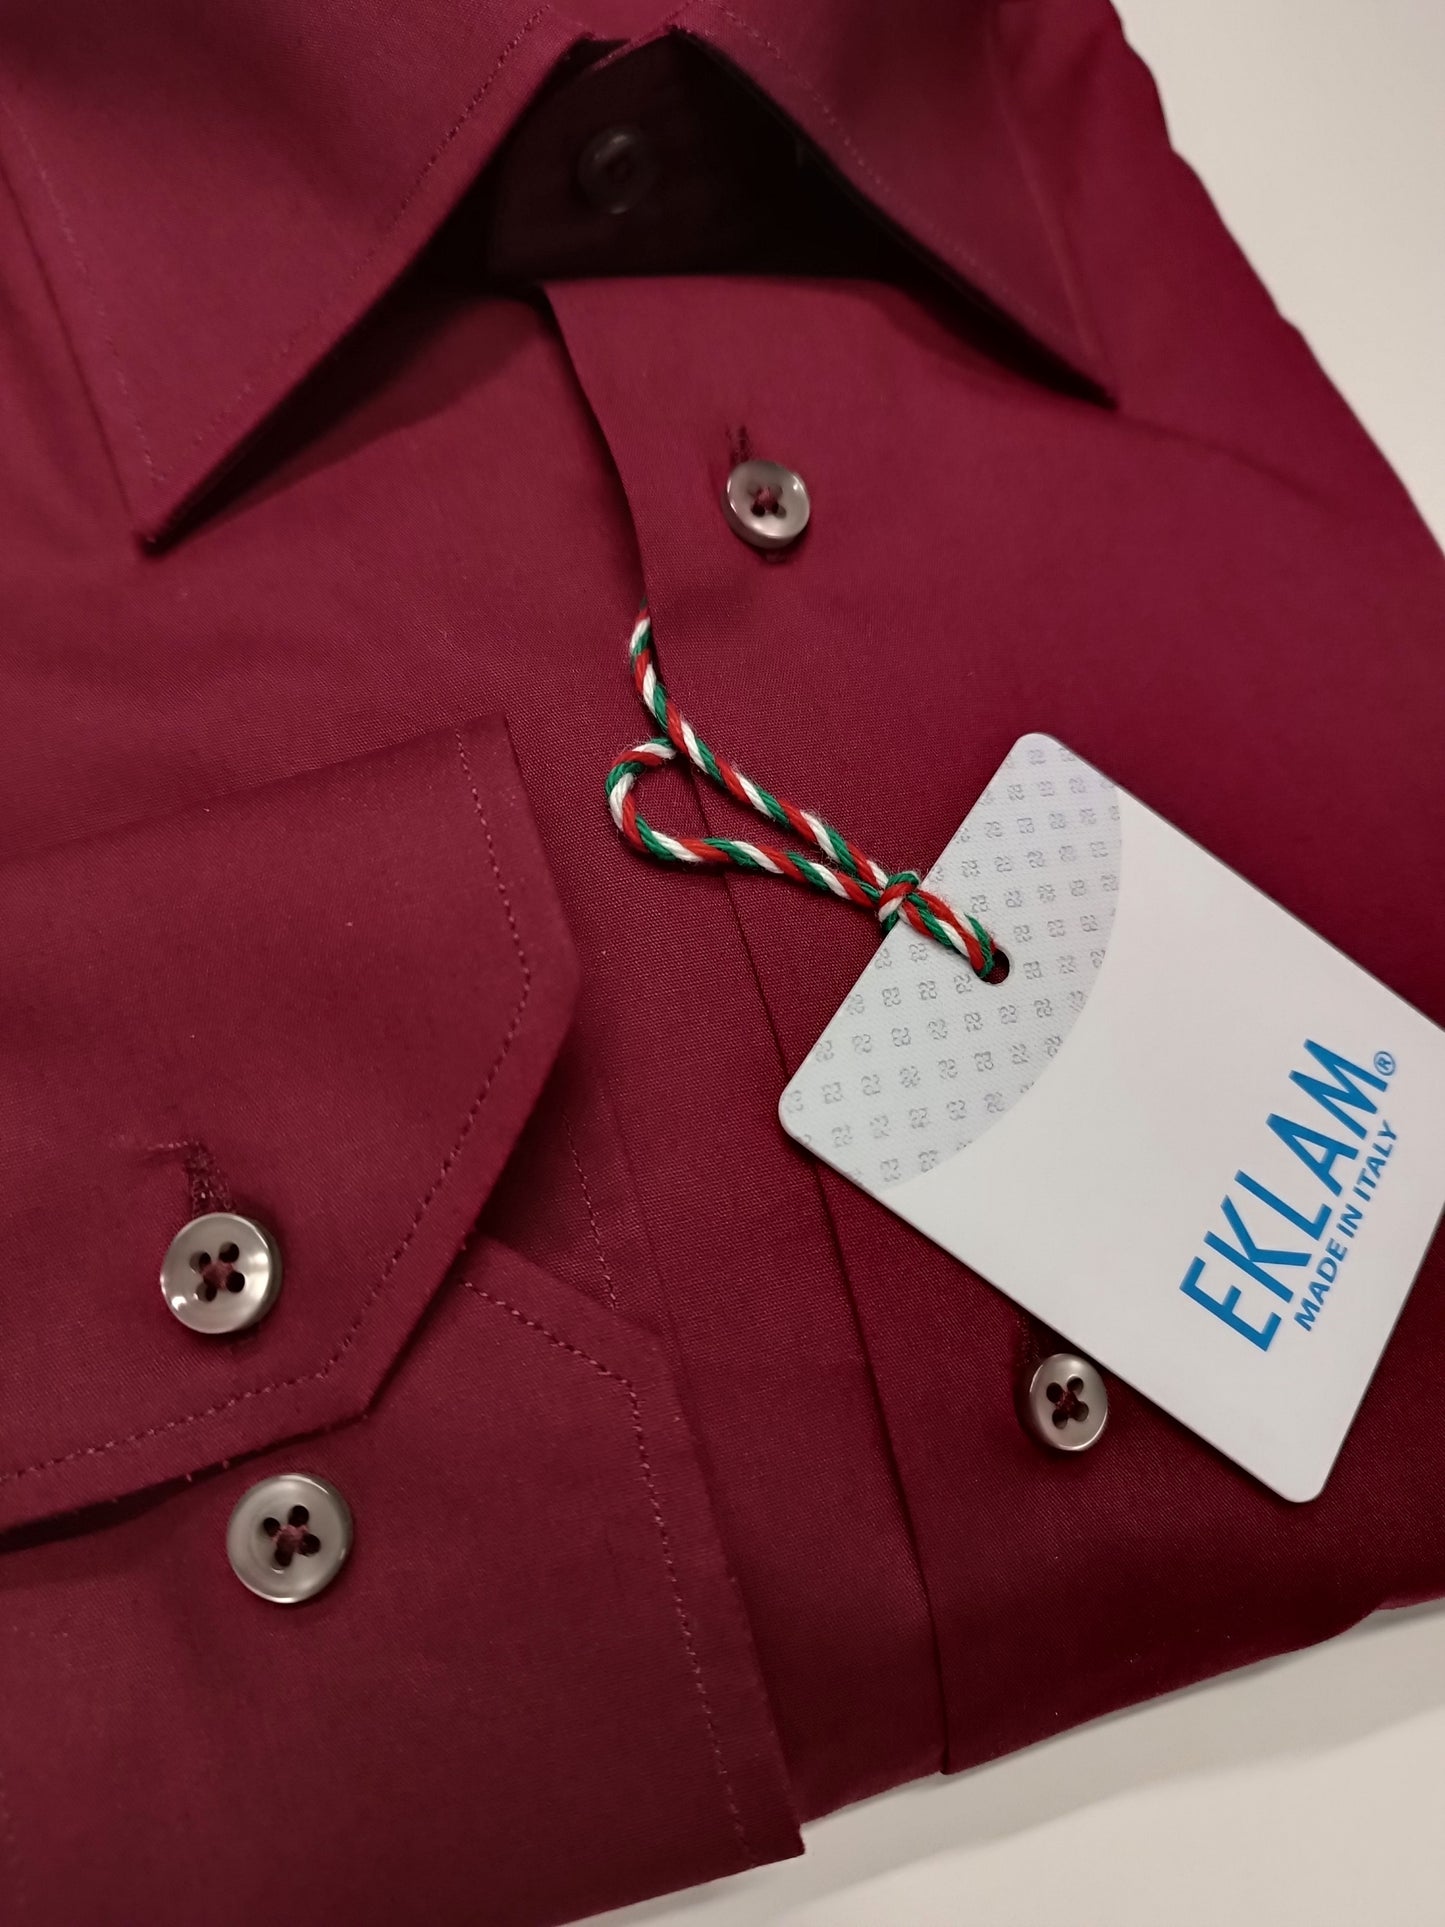 Men's shirt with spread collar in burgundy color